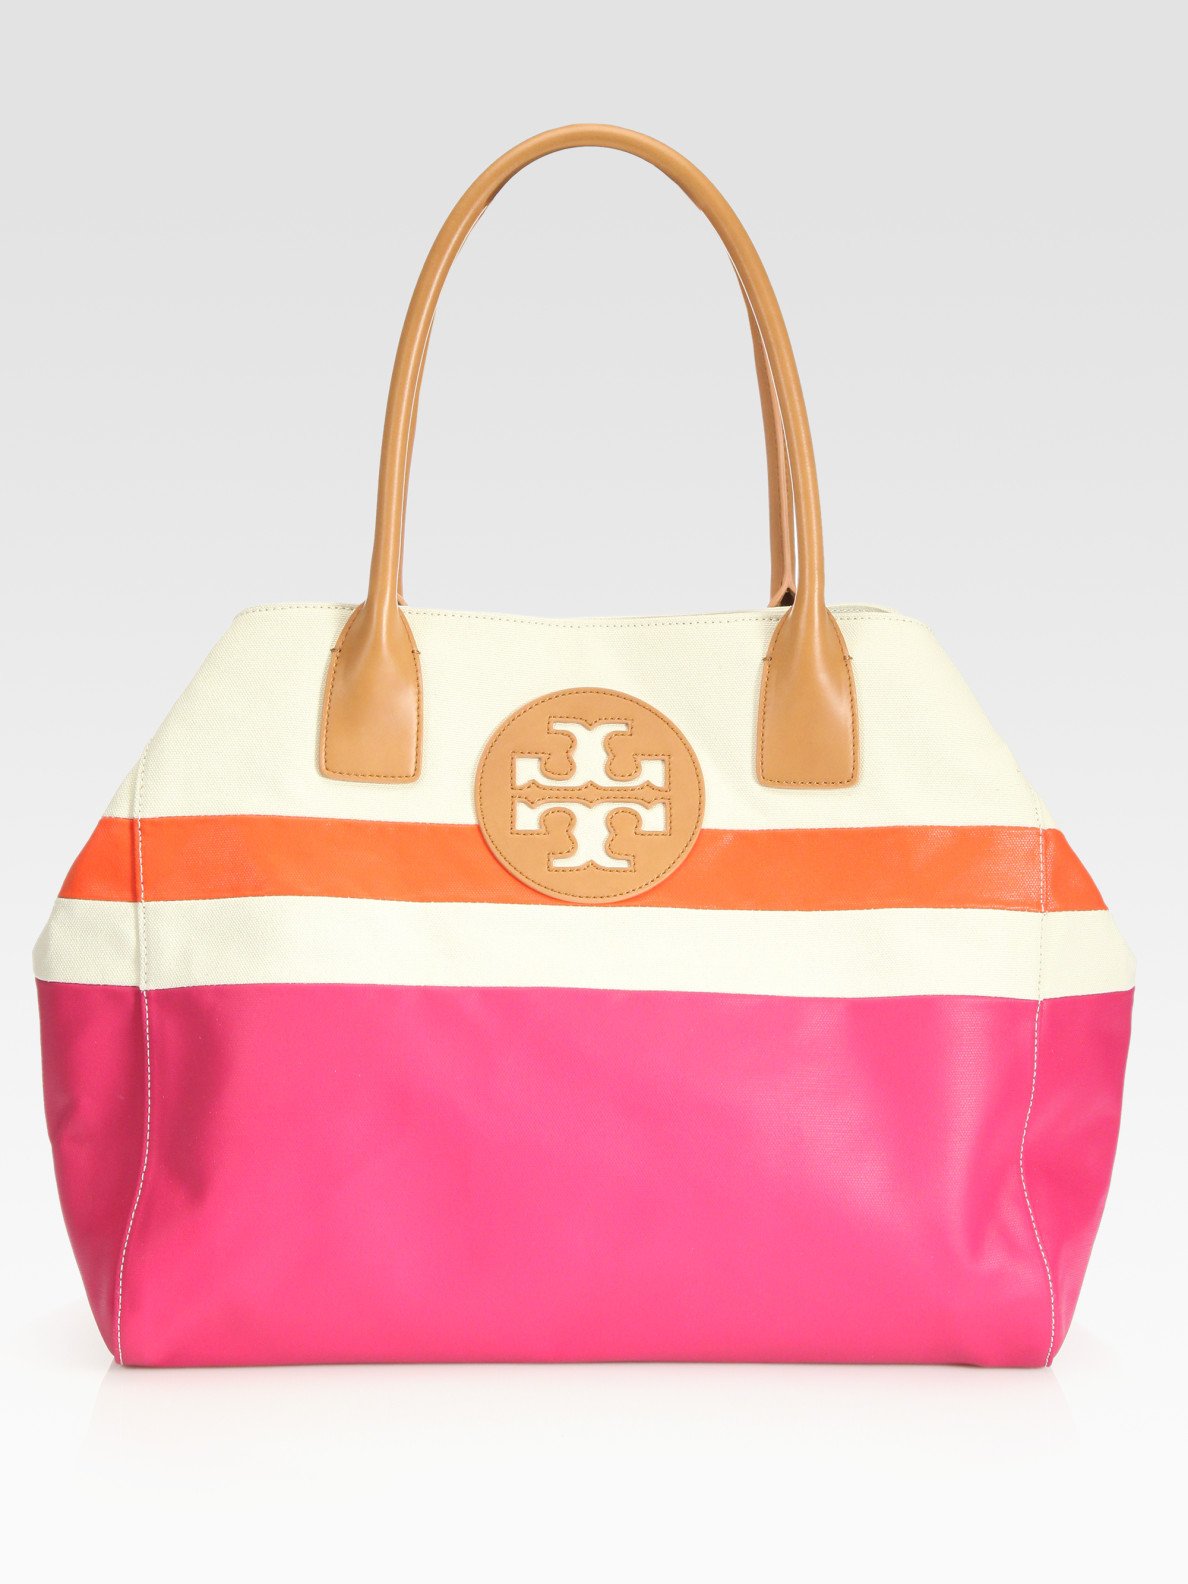 Tory Burch Dipped Canvas Beach Tote Bag in Natural | Lyst